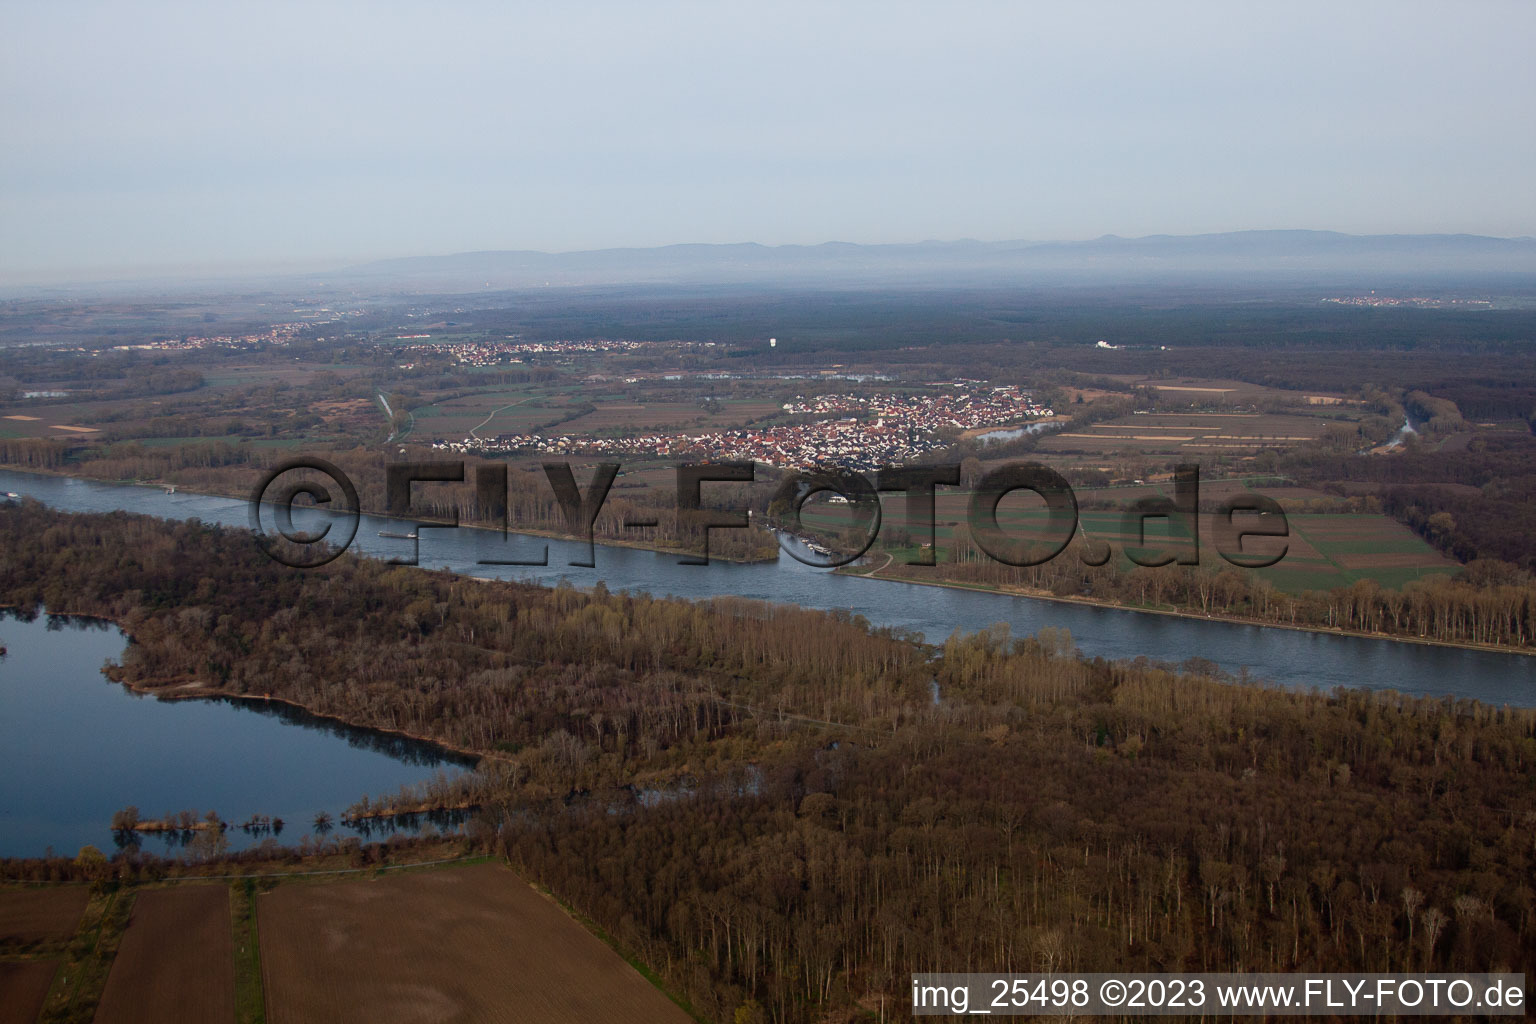 Lautermouth in Neuburg in the state Rhineland-Palatinate, Germany from above